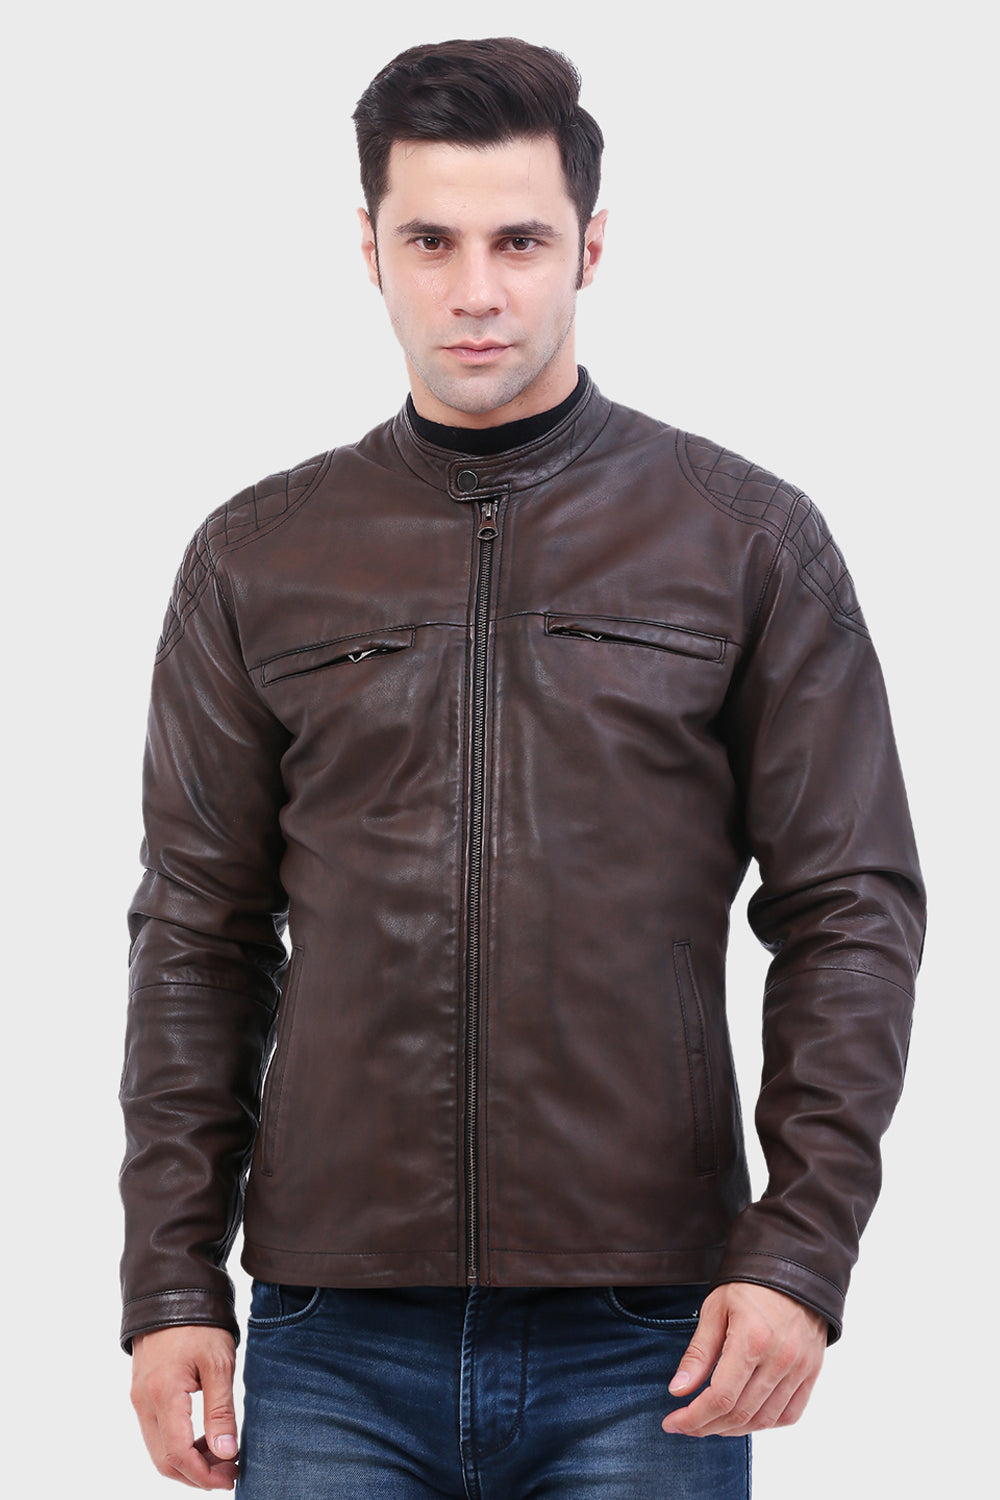 Justanned Brown Double Flap Pockets Jacket